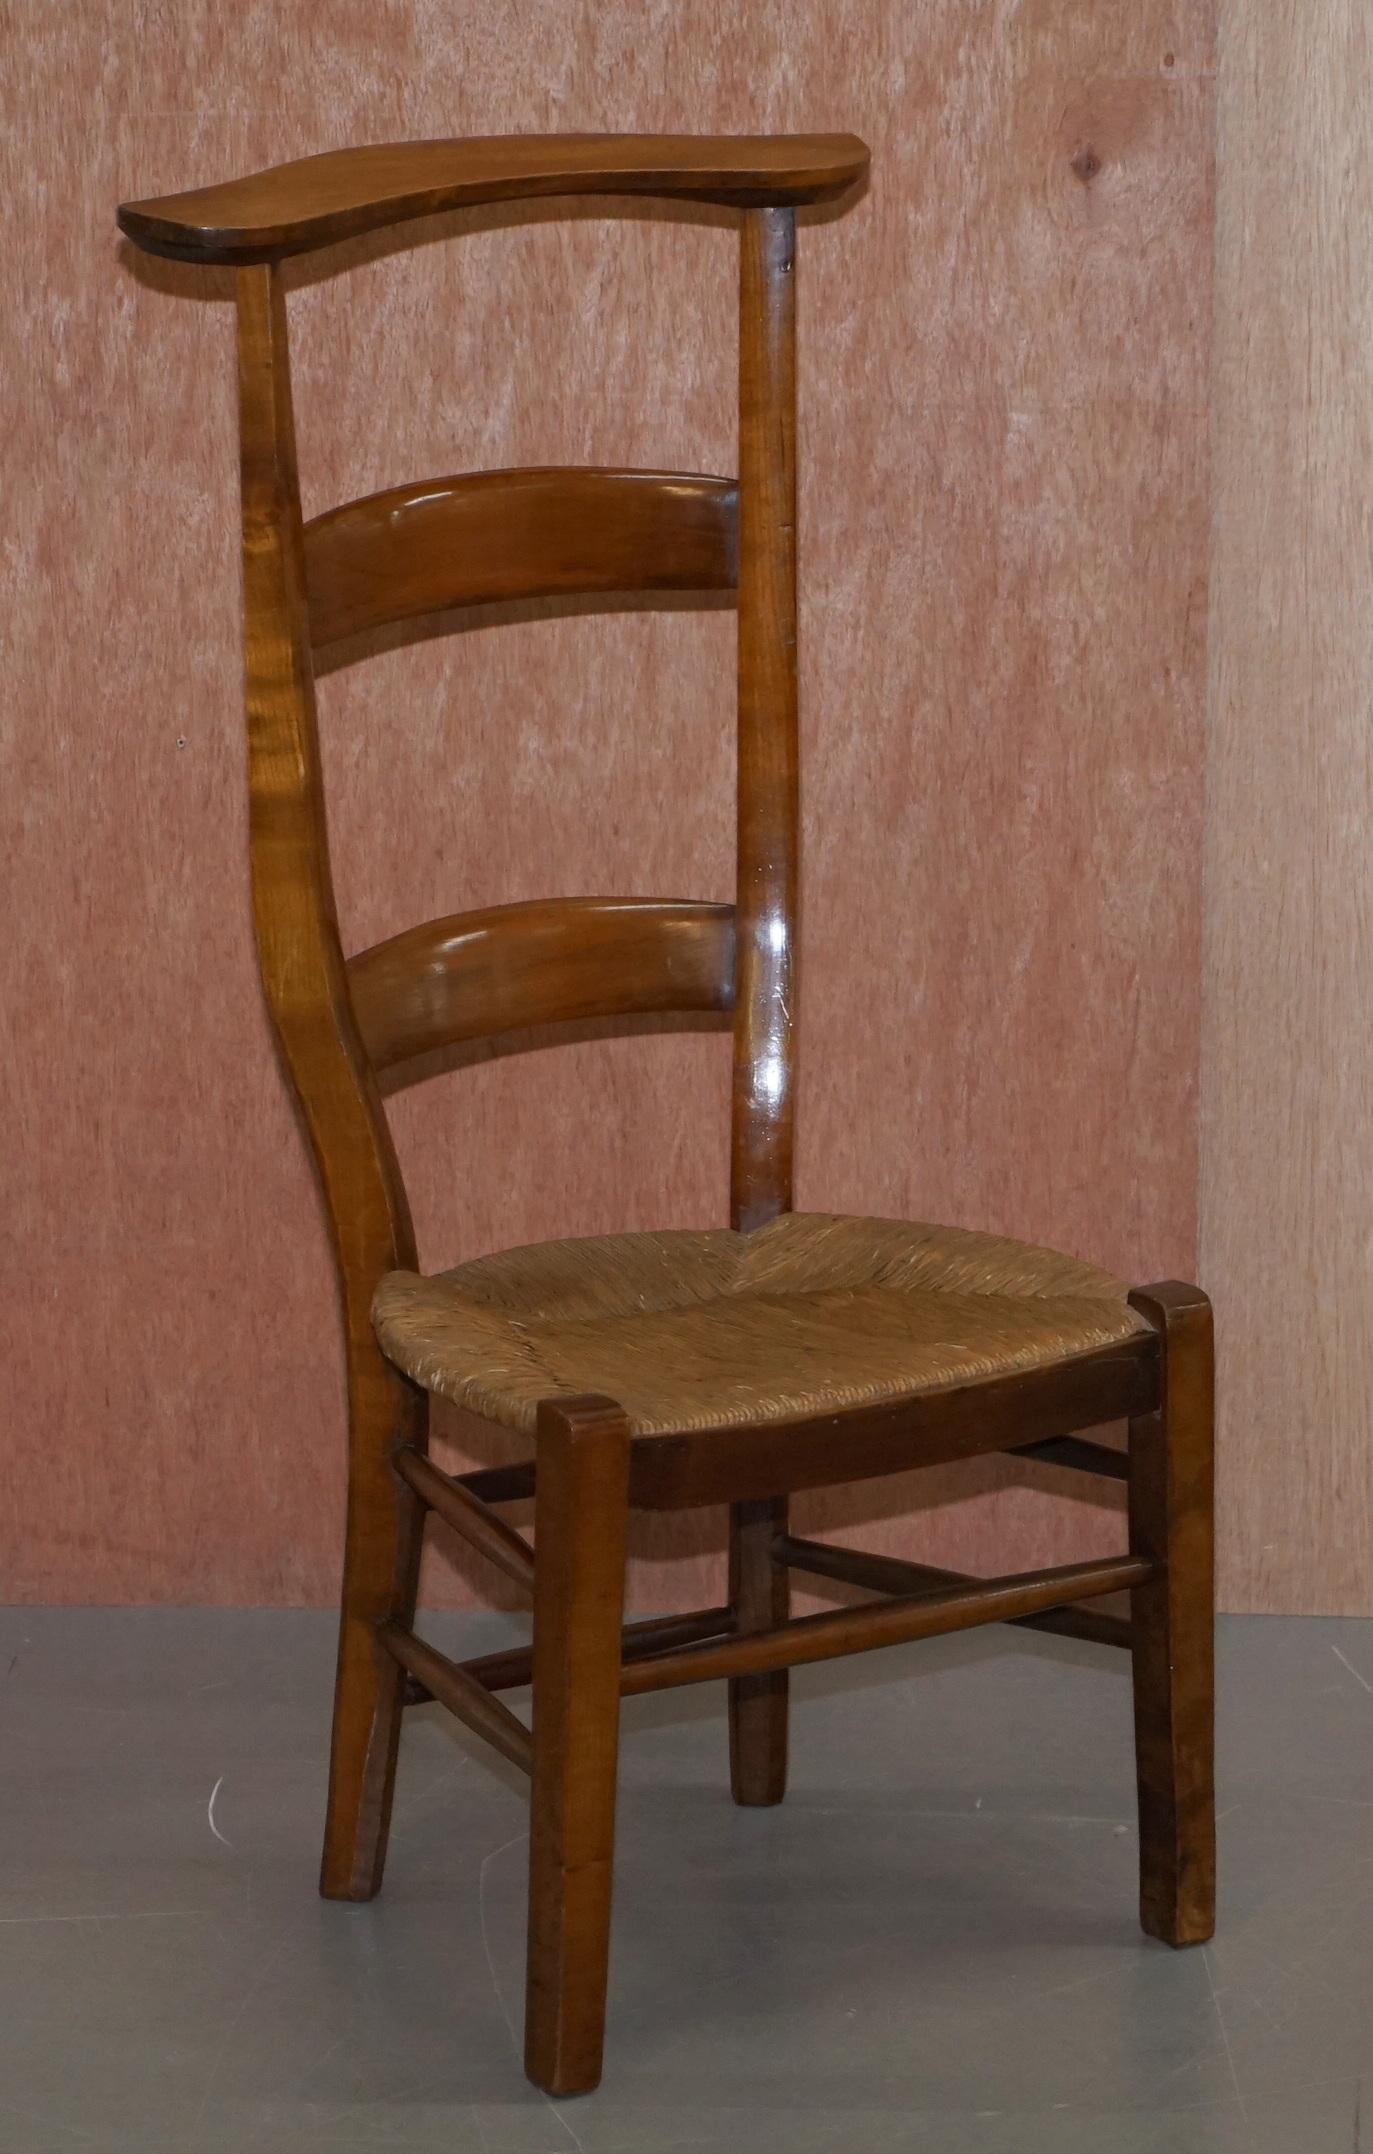 We are delighted to offer for sale this stunning pair of early 19th century Prie Dieu chairs made with solid walnut frames and the original thatched sears

A great pair of occasional chairs, they were originally designed as prayer chairs and are